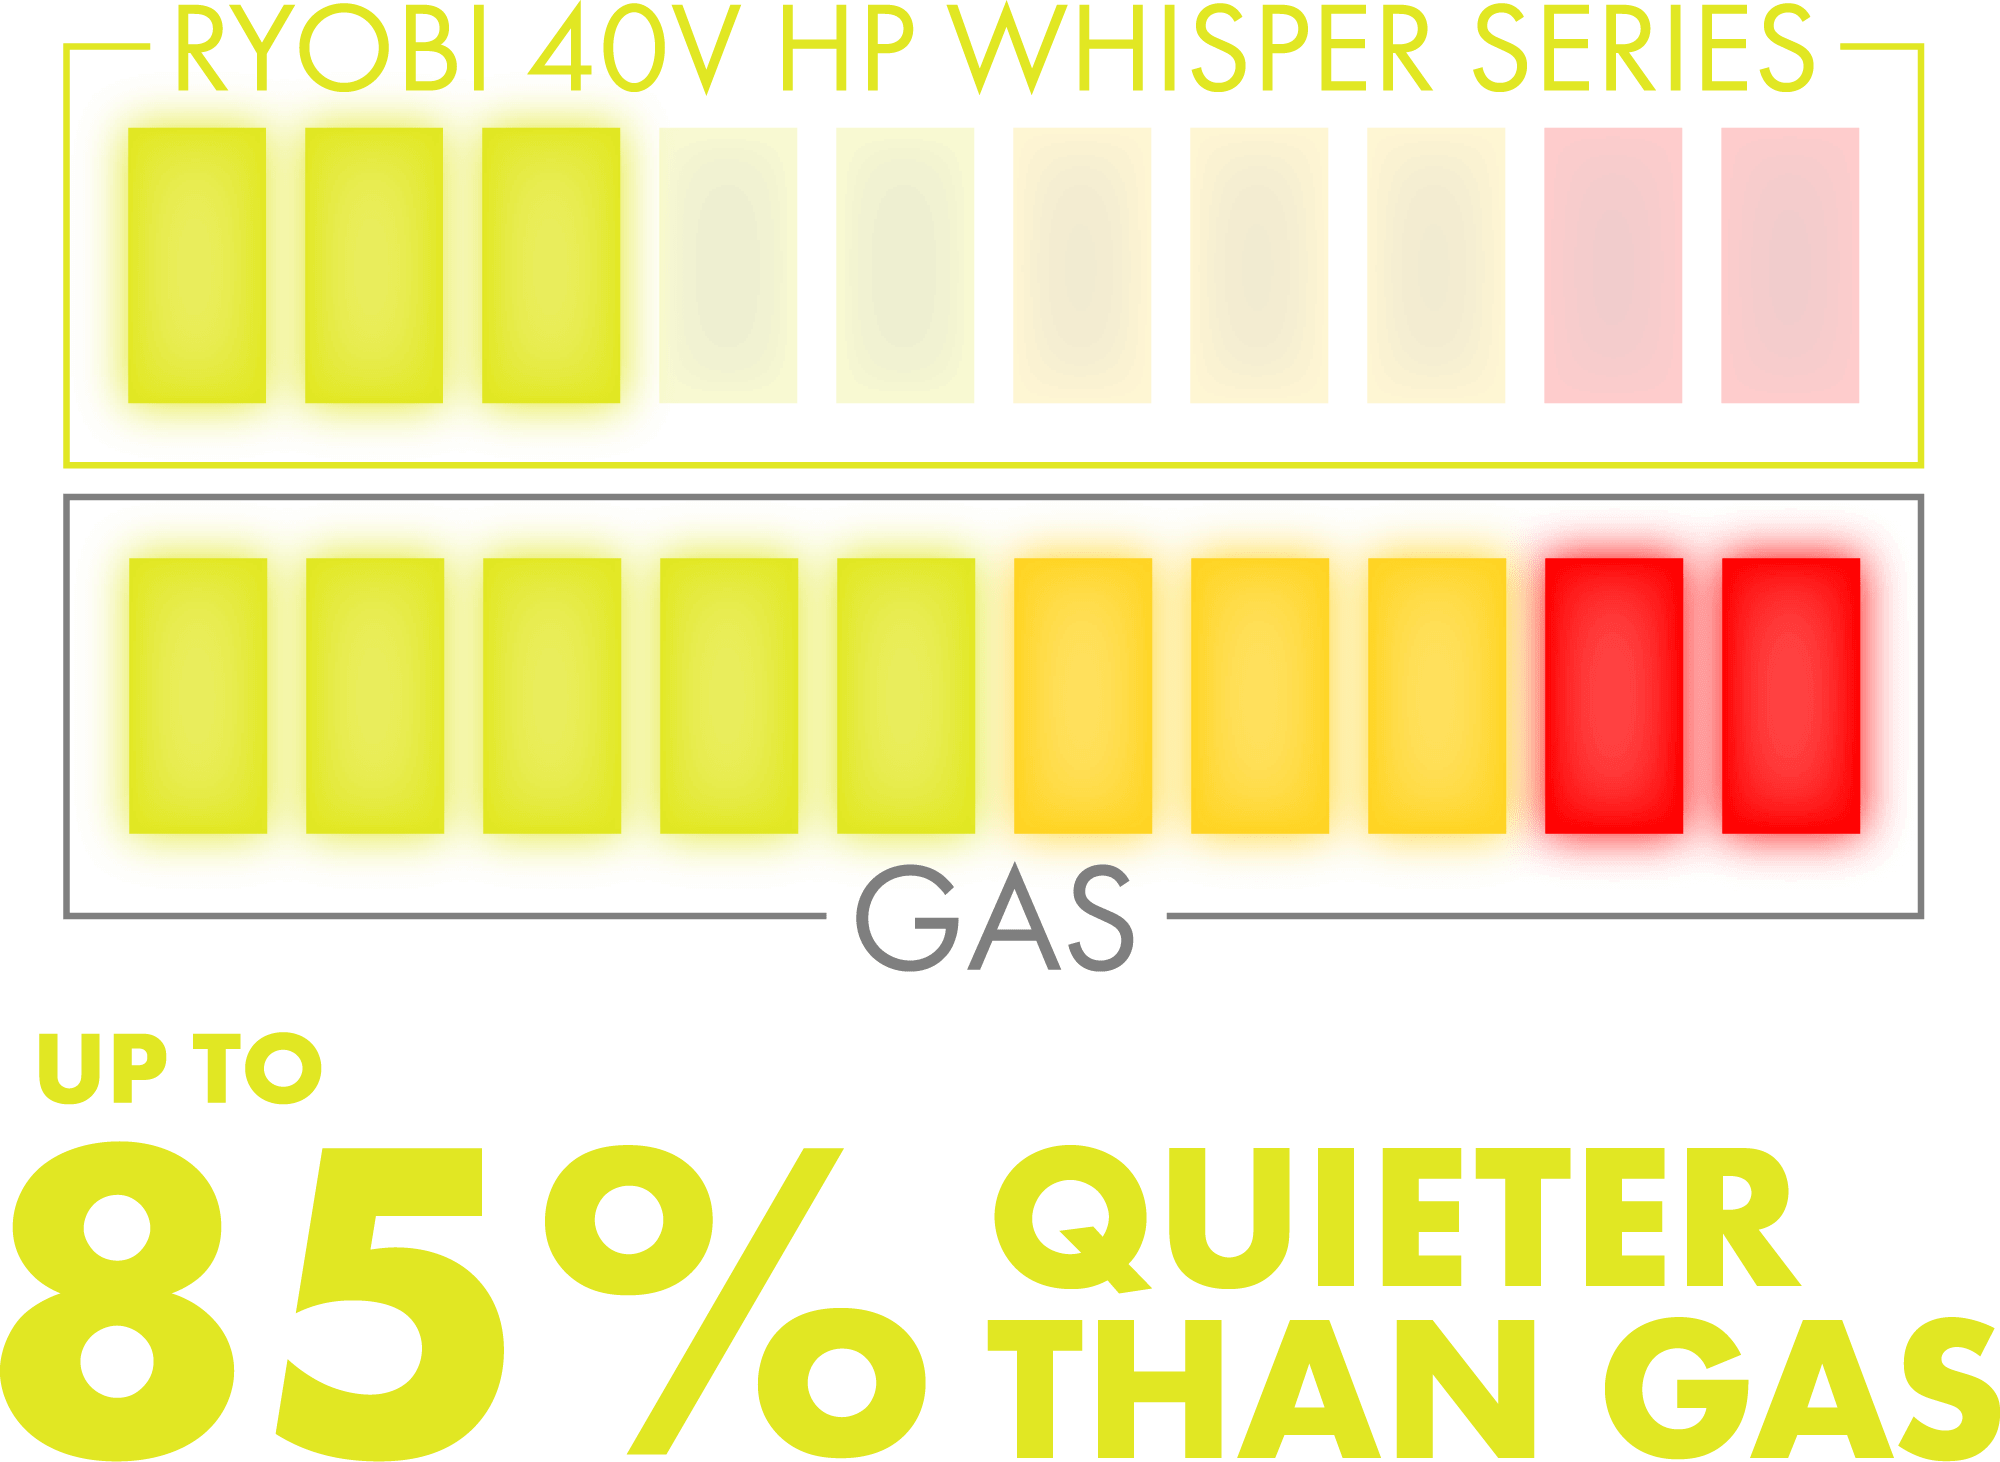 Bar graph with tagline: Up to 85% Quieter than Gas